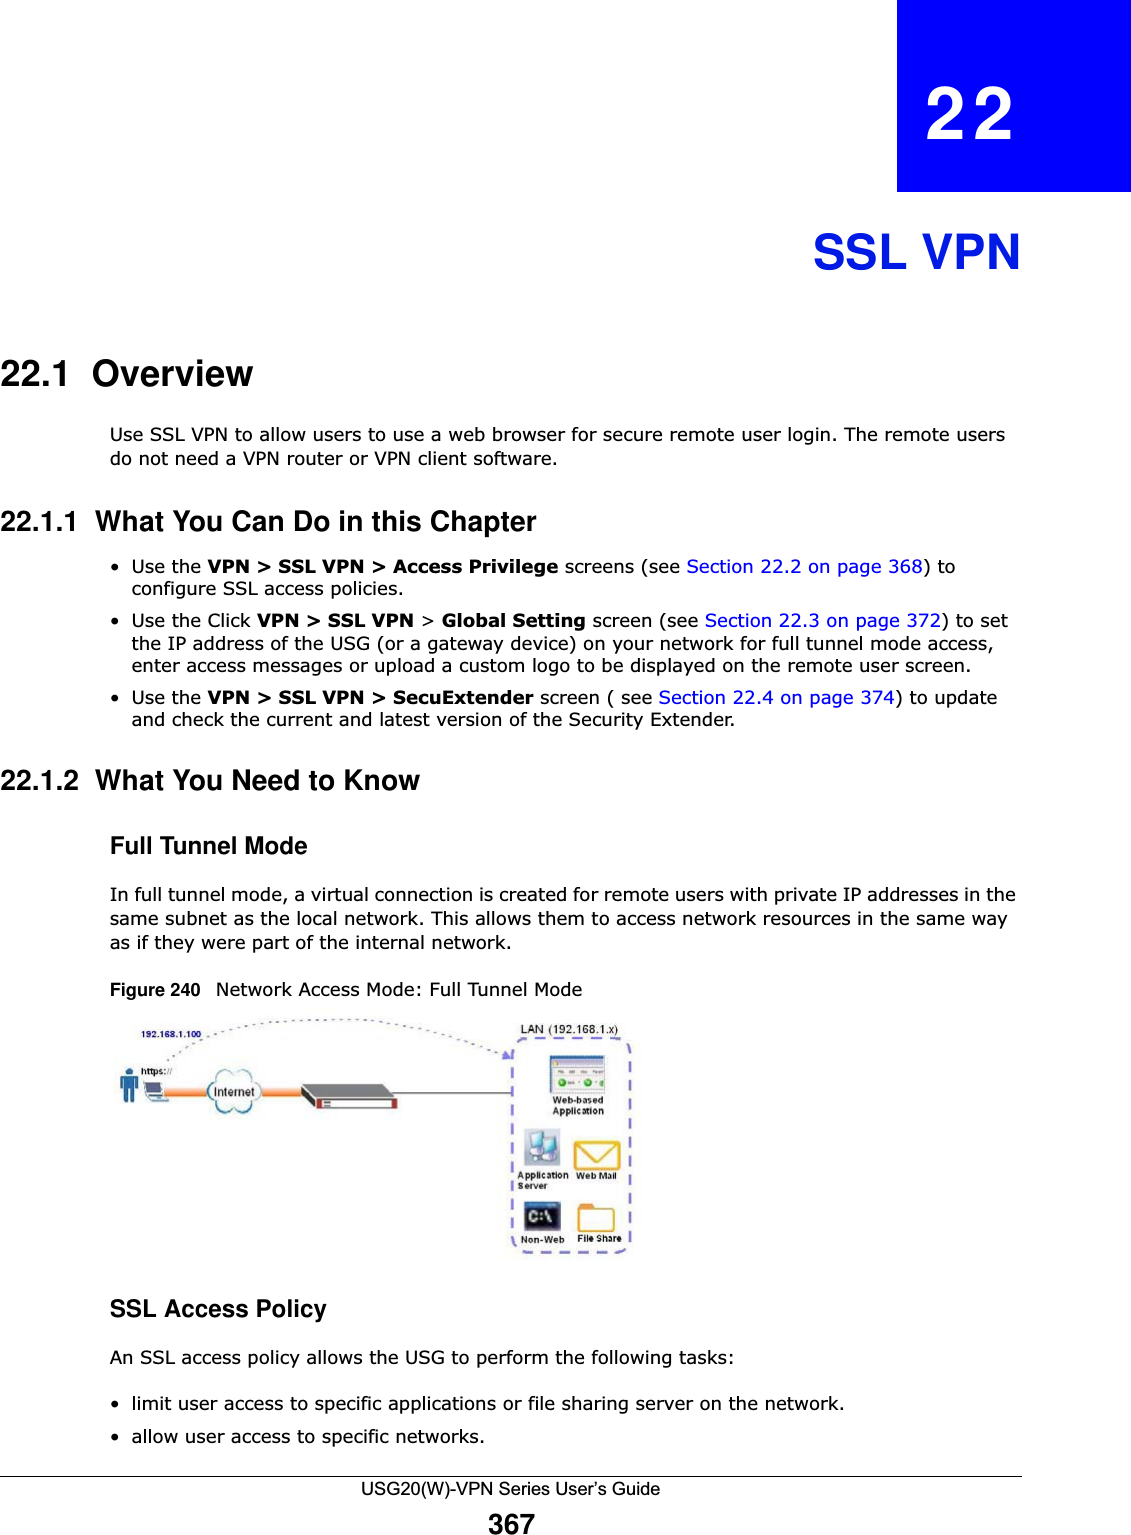 USG20(W)-VPN Series User’s Guide367CHAPTER   22SSL VPN22.1  OverviewUse SSL VPN to allow users to use a web browser for secure remote user login. The remote users do not need a VPN router or VPN client software. 22.1.1  What You Can Do in this Chapter•Use the VPN &gt; SSL VPN &gt; Access Privilege screens (see Section 22.2 on page 368) to configure SSL access policies. • Use the Click VPN &gt; SSL VPN &gt; Global Setting screen (see Section 22.3 on page 372) to set the IP address of the USG (or a gateway device) on your network for full tunnel mode access, enter access messages or upload a custom logo to be displayed on the remote user screen. •Use the VPN &gt; SSL VPN &gt; SecuExtender screen ( see Section 22.4 on page 374) to update and check the current and latest version of the Security Extender.22.1.2  What You Need to KnowFull Tunnel Mode In full tunnel mode, a virtual connection is created for remote users with private IP addresses in the same subnet as the local network. This allows them to access network resources in the same way as if they were part of the internal network. Figure 240   Network Access Mode: Full Tunnel Mode SSL Access Policy  An SSL access policy allows the USG to perform the following tasks: • limit user access to specific applications or file sharing server on the network.• allow user access to specific networks. 